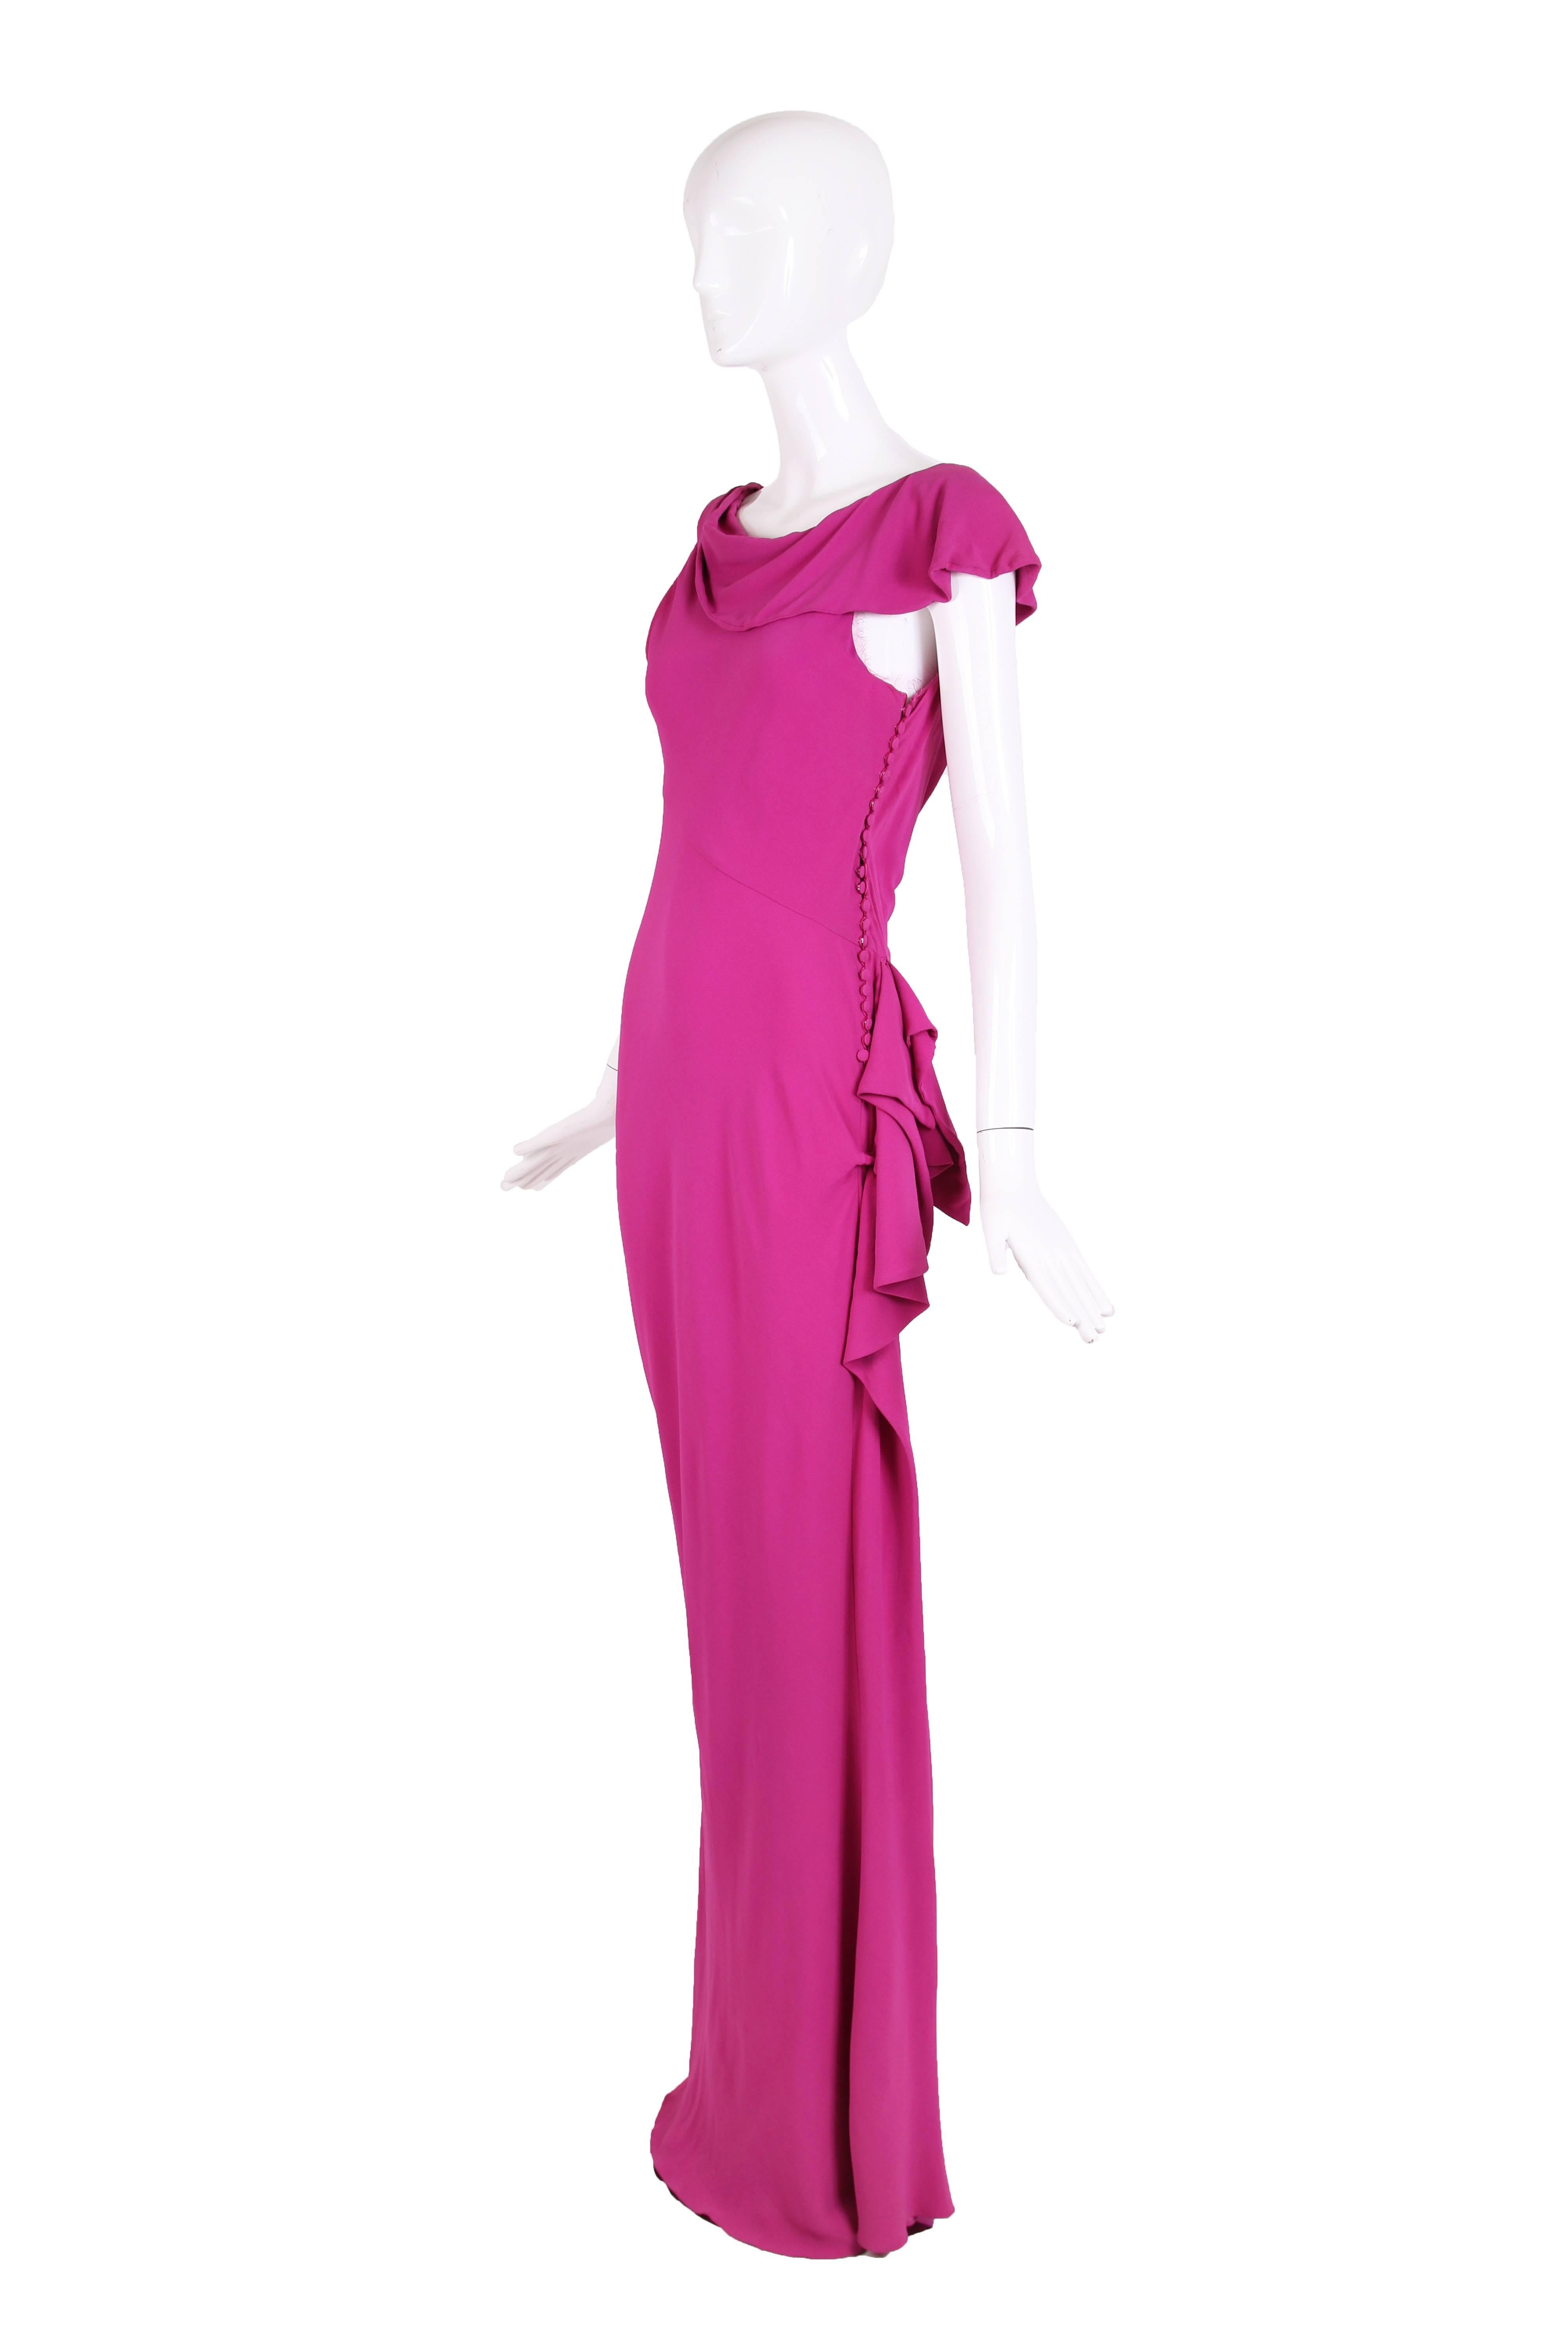 Christian Dior by John Galliano unlabeled bias-cut pink crepe evening gown with signature fabric button closure down the side, asymmetric neckline and decorative ruffle that begins at left hip and continues down side of the skirt. In excellent